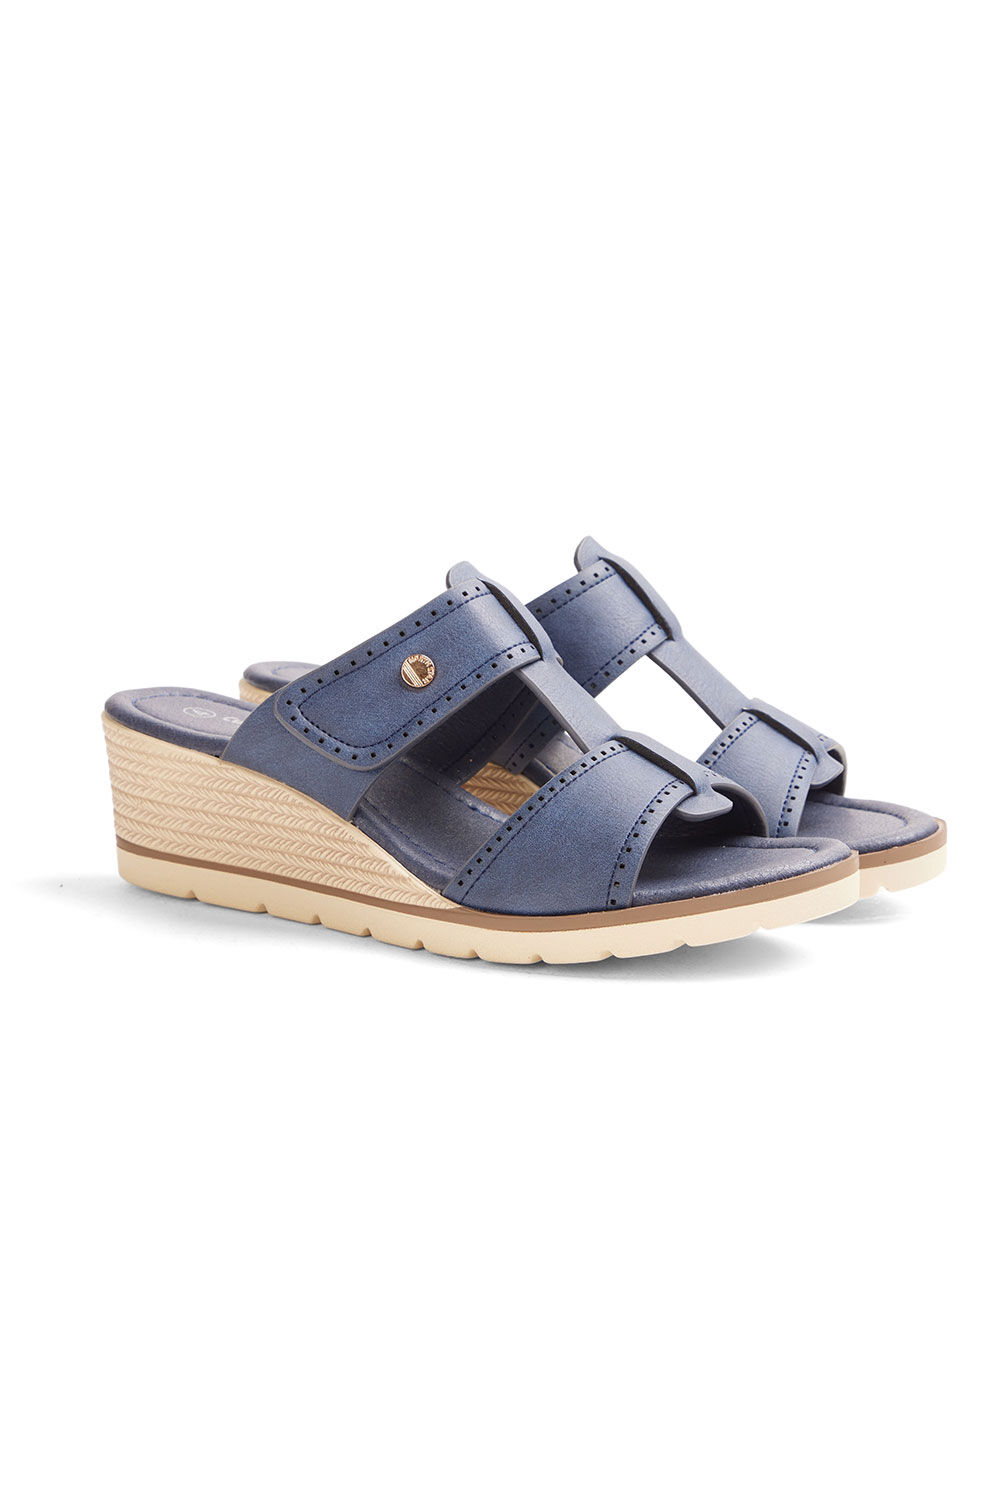 Cushion Walk Blue - Studded Wedge Sandals With Strap Detail, Size: 7